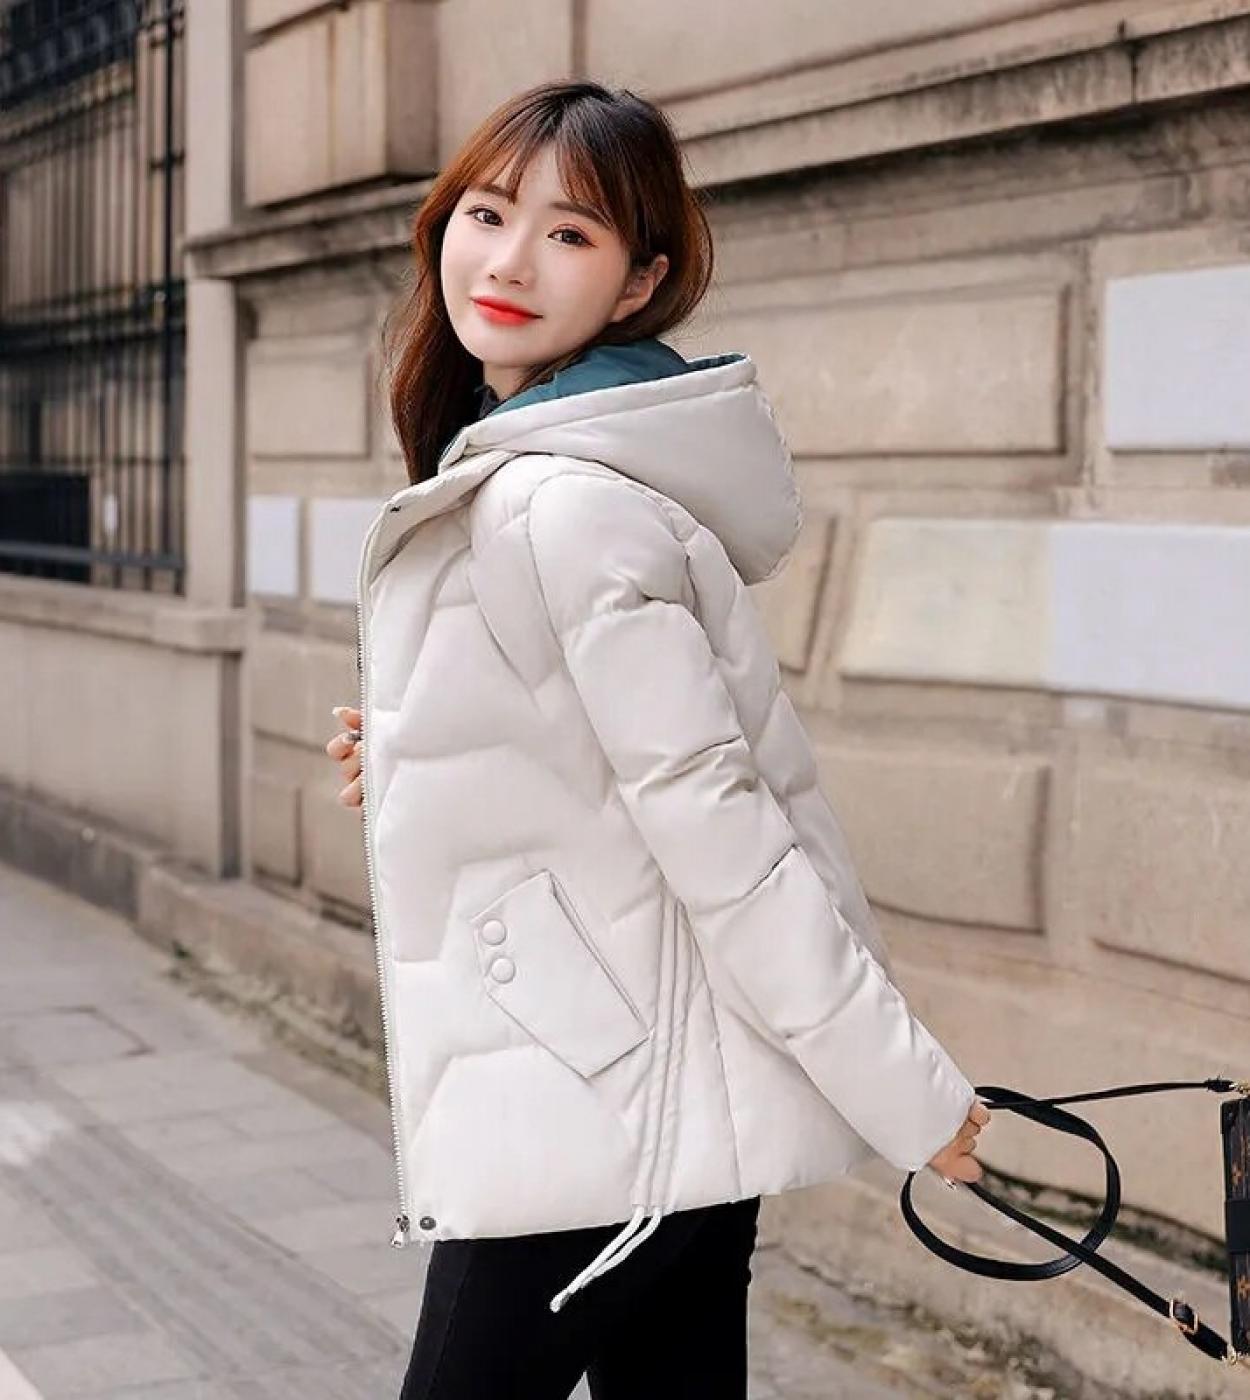 Winter Jacket 2022 New Womens Parkas Hooded Snow Wear Coats Cotton Padded Jacket Casual Thick Ladies Female Parka Outwe